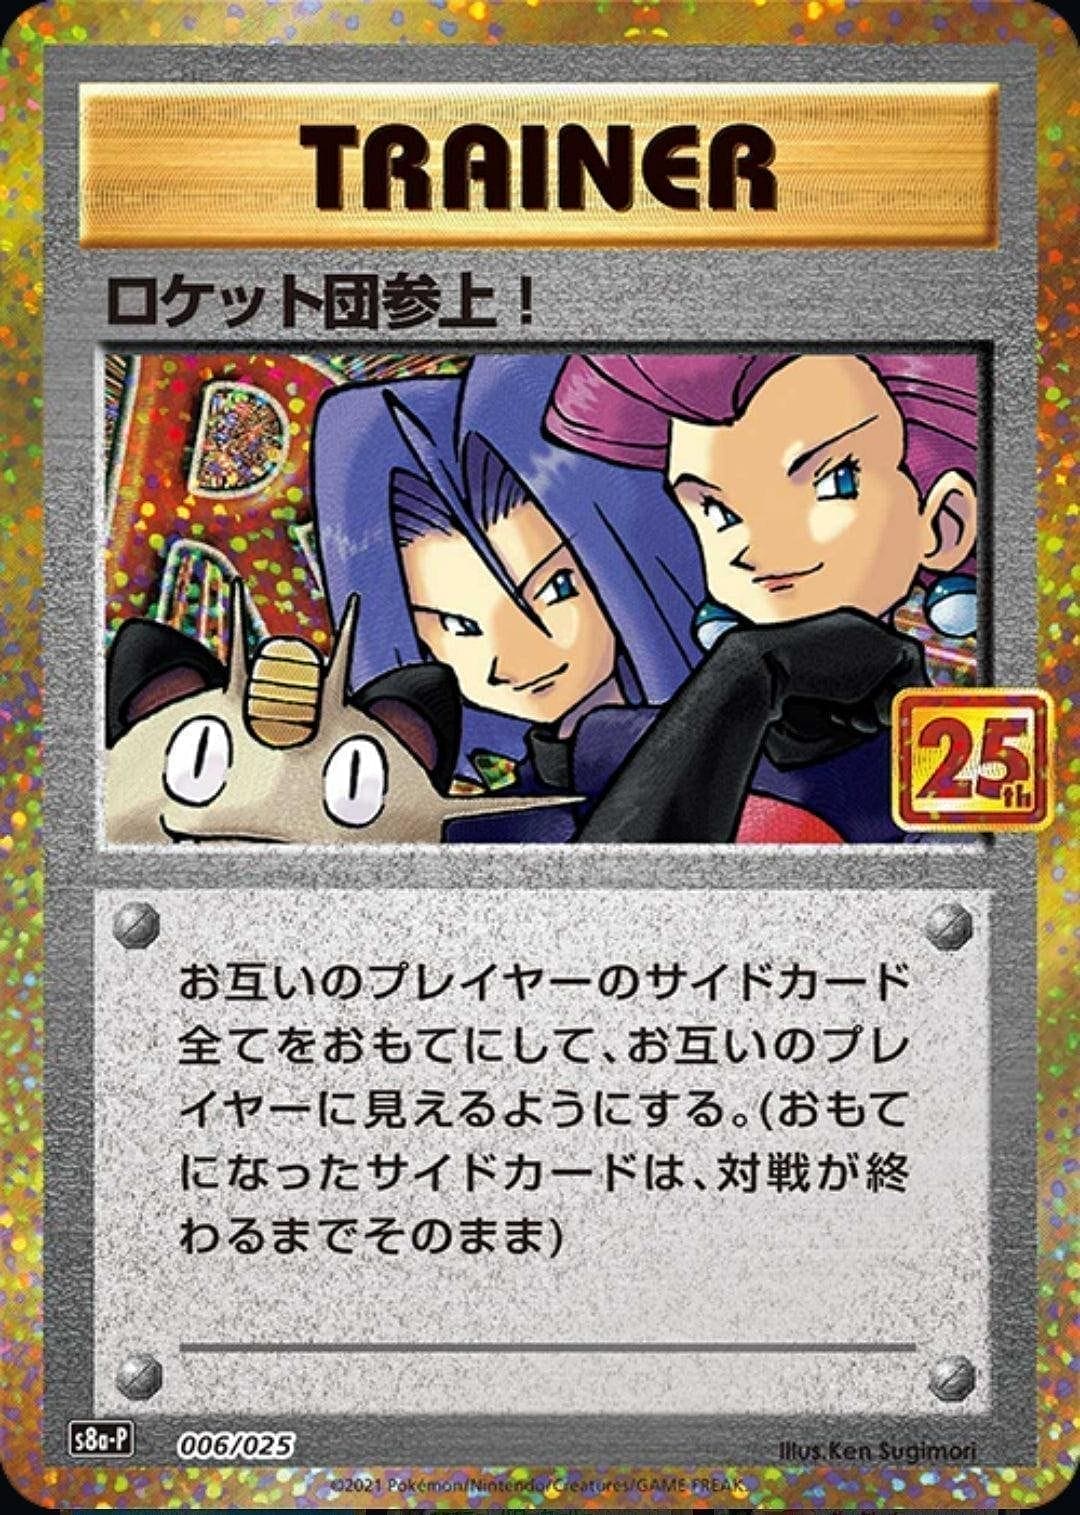 Here Comes Team Rocket 006/025 | s8a-p ChitoroShop